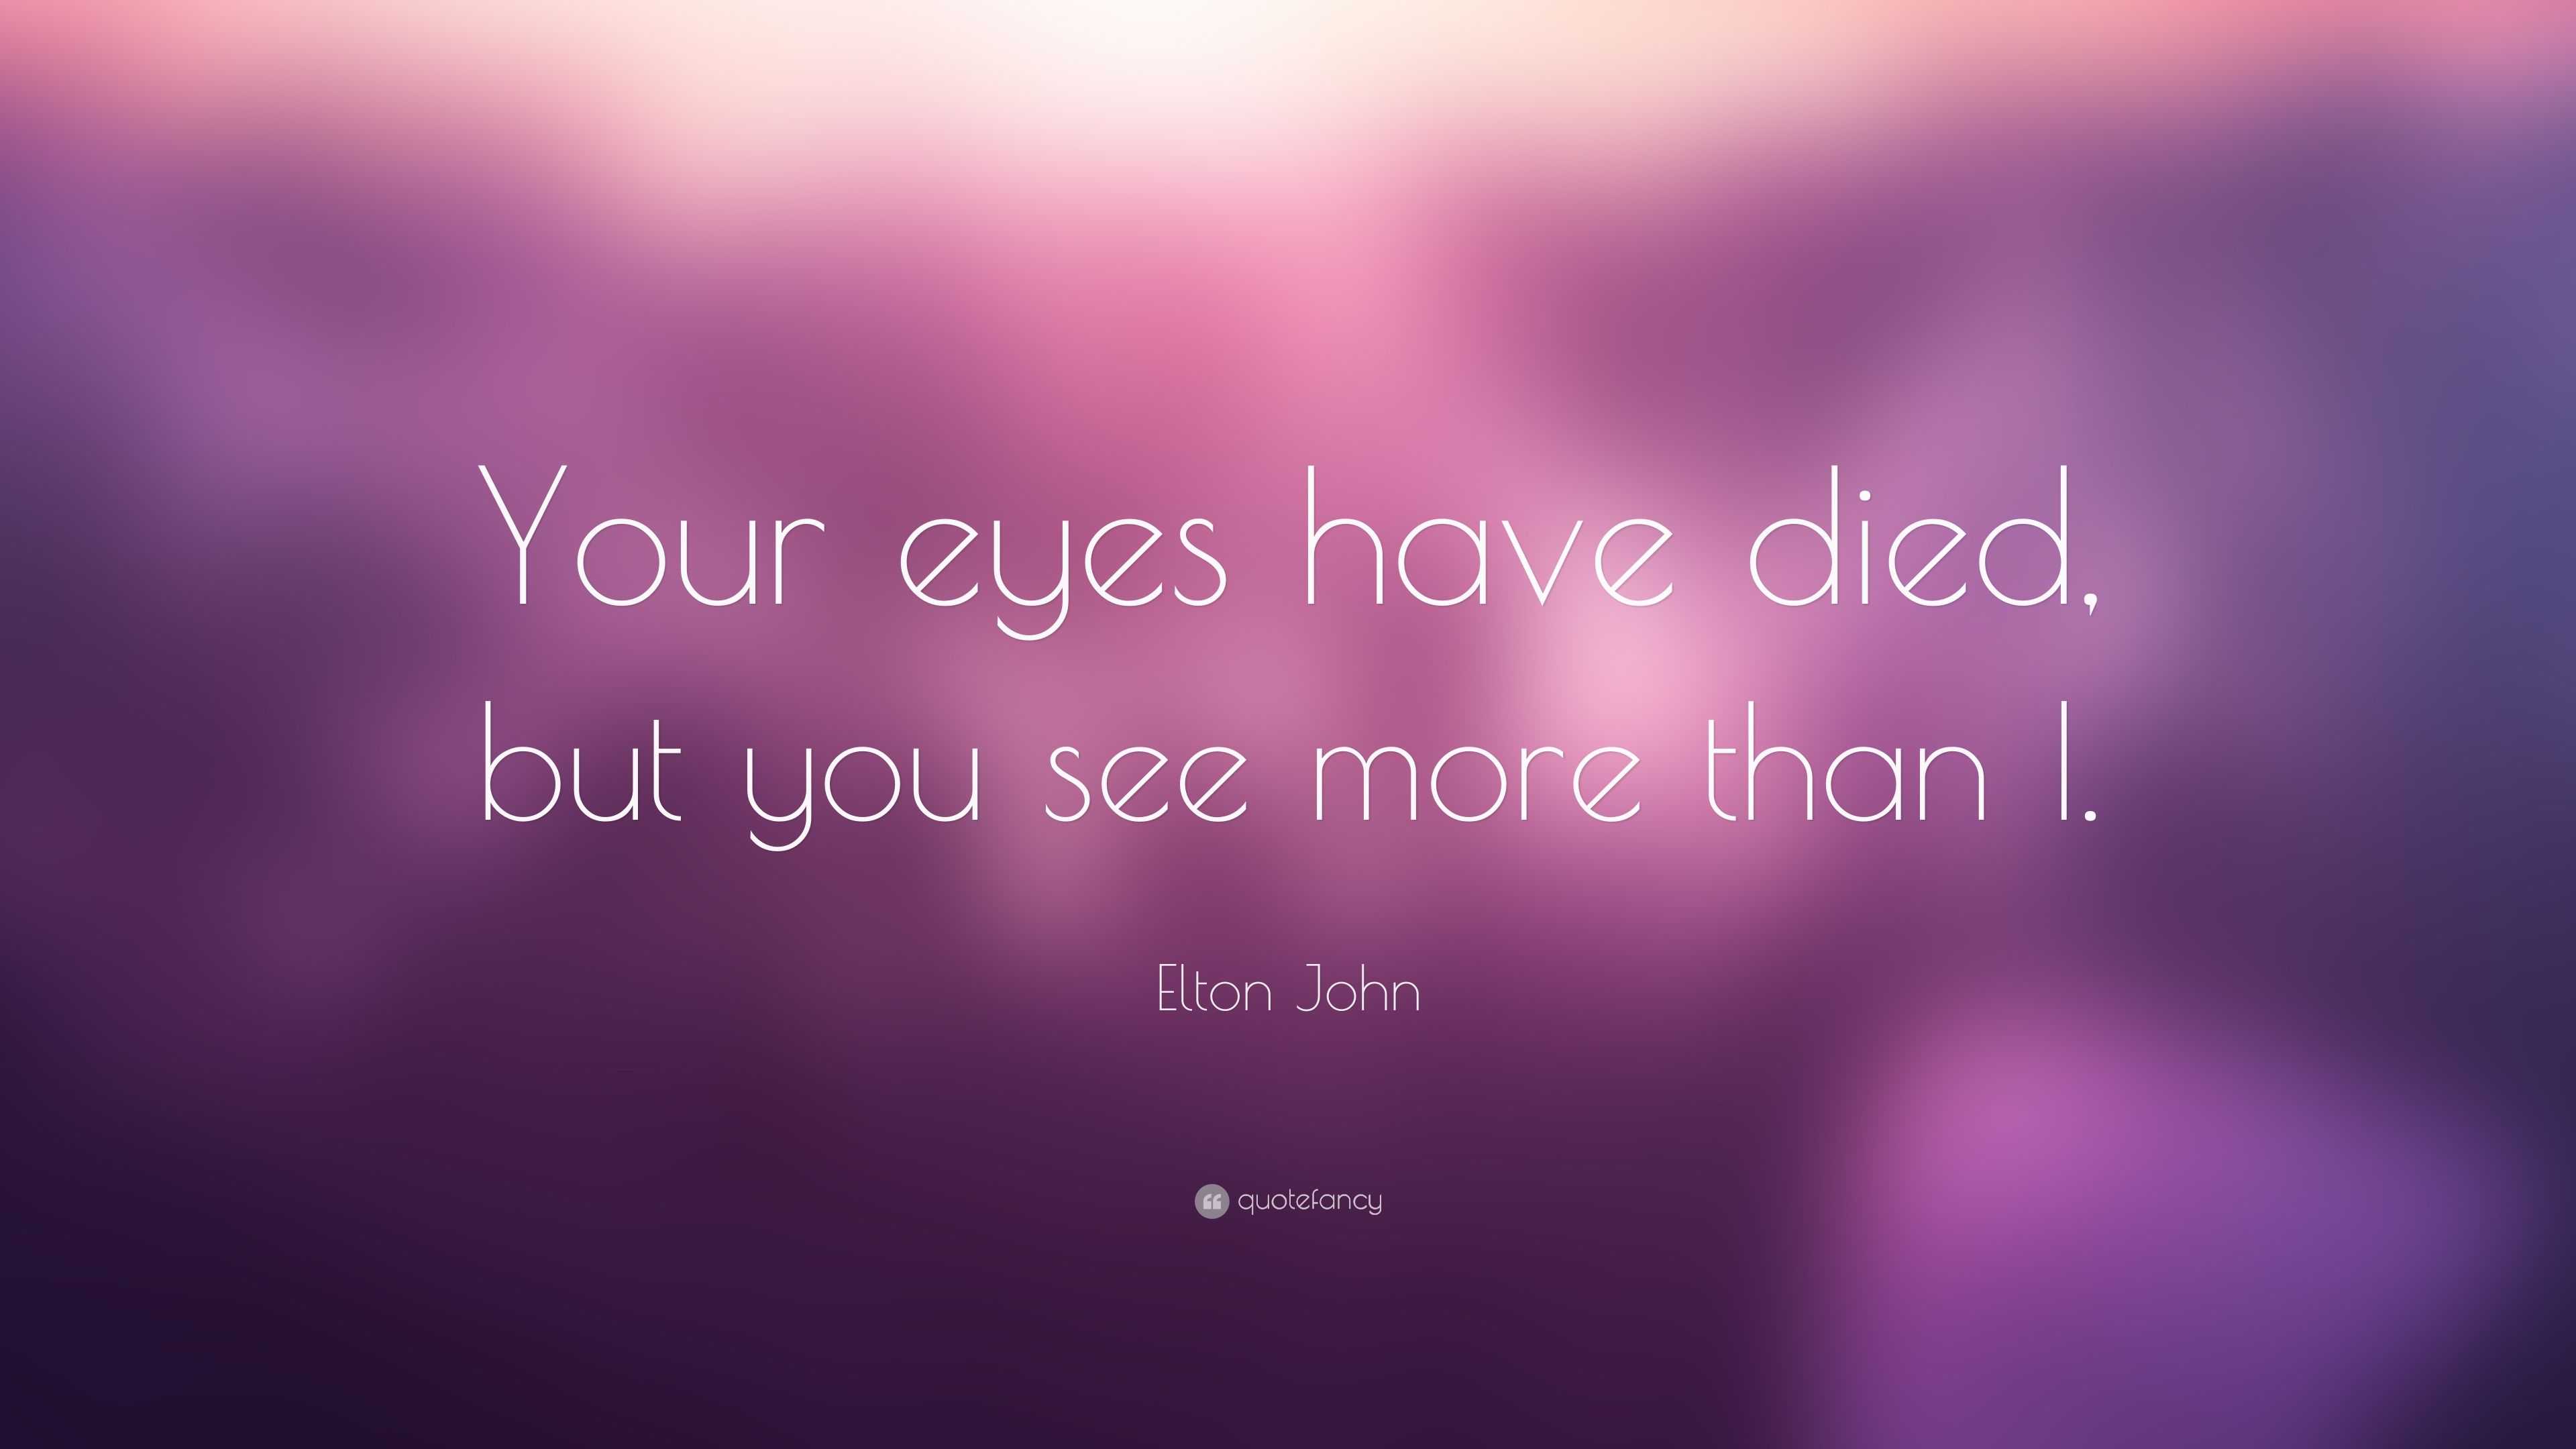 Elton John Quote: “Your eyes have died, but you see more than I.”